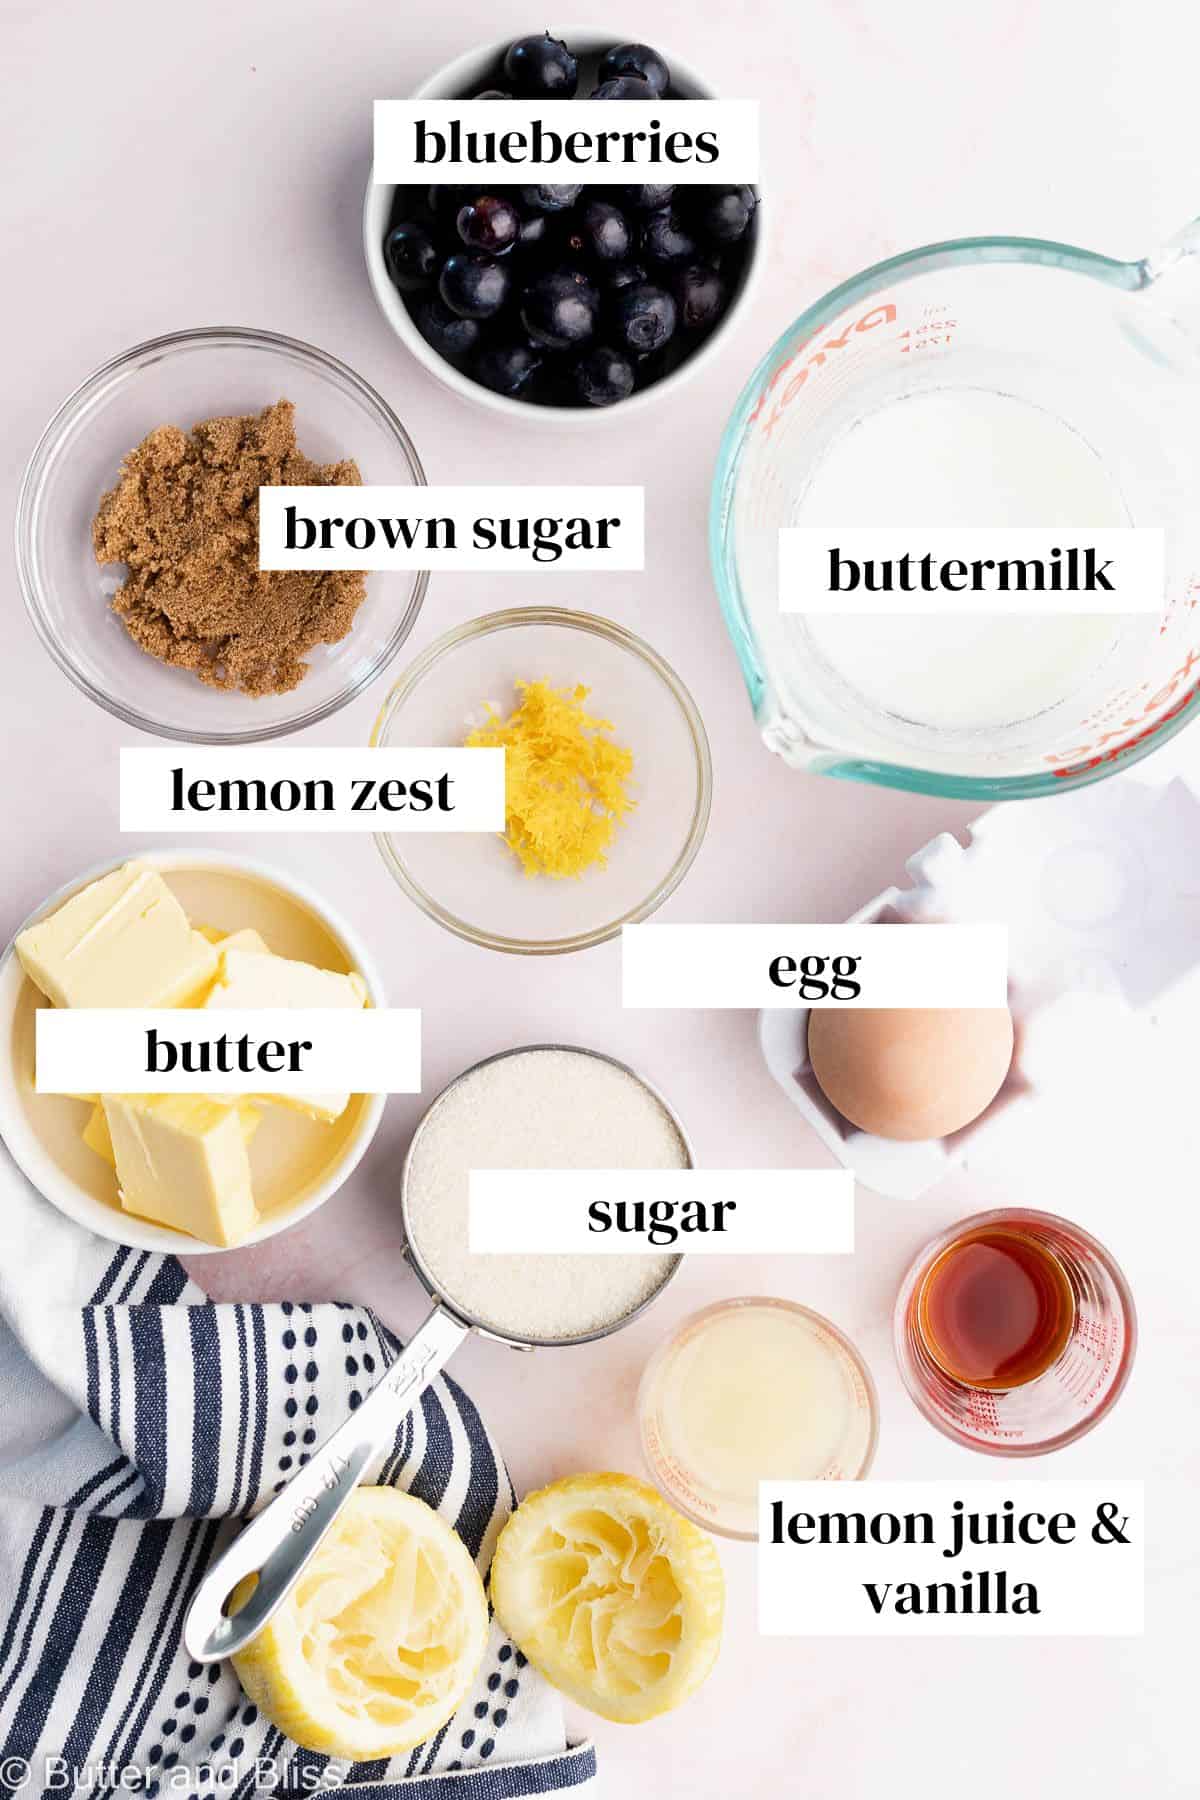 Wet ingredients for a butter cak in small bowls arranged on a table.